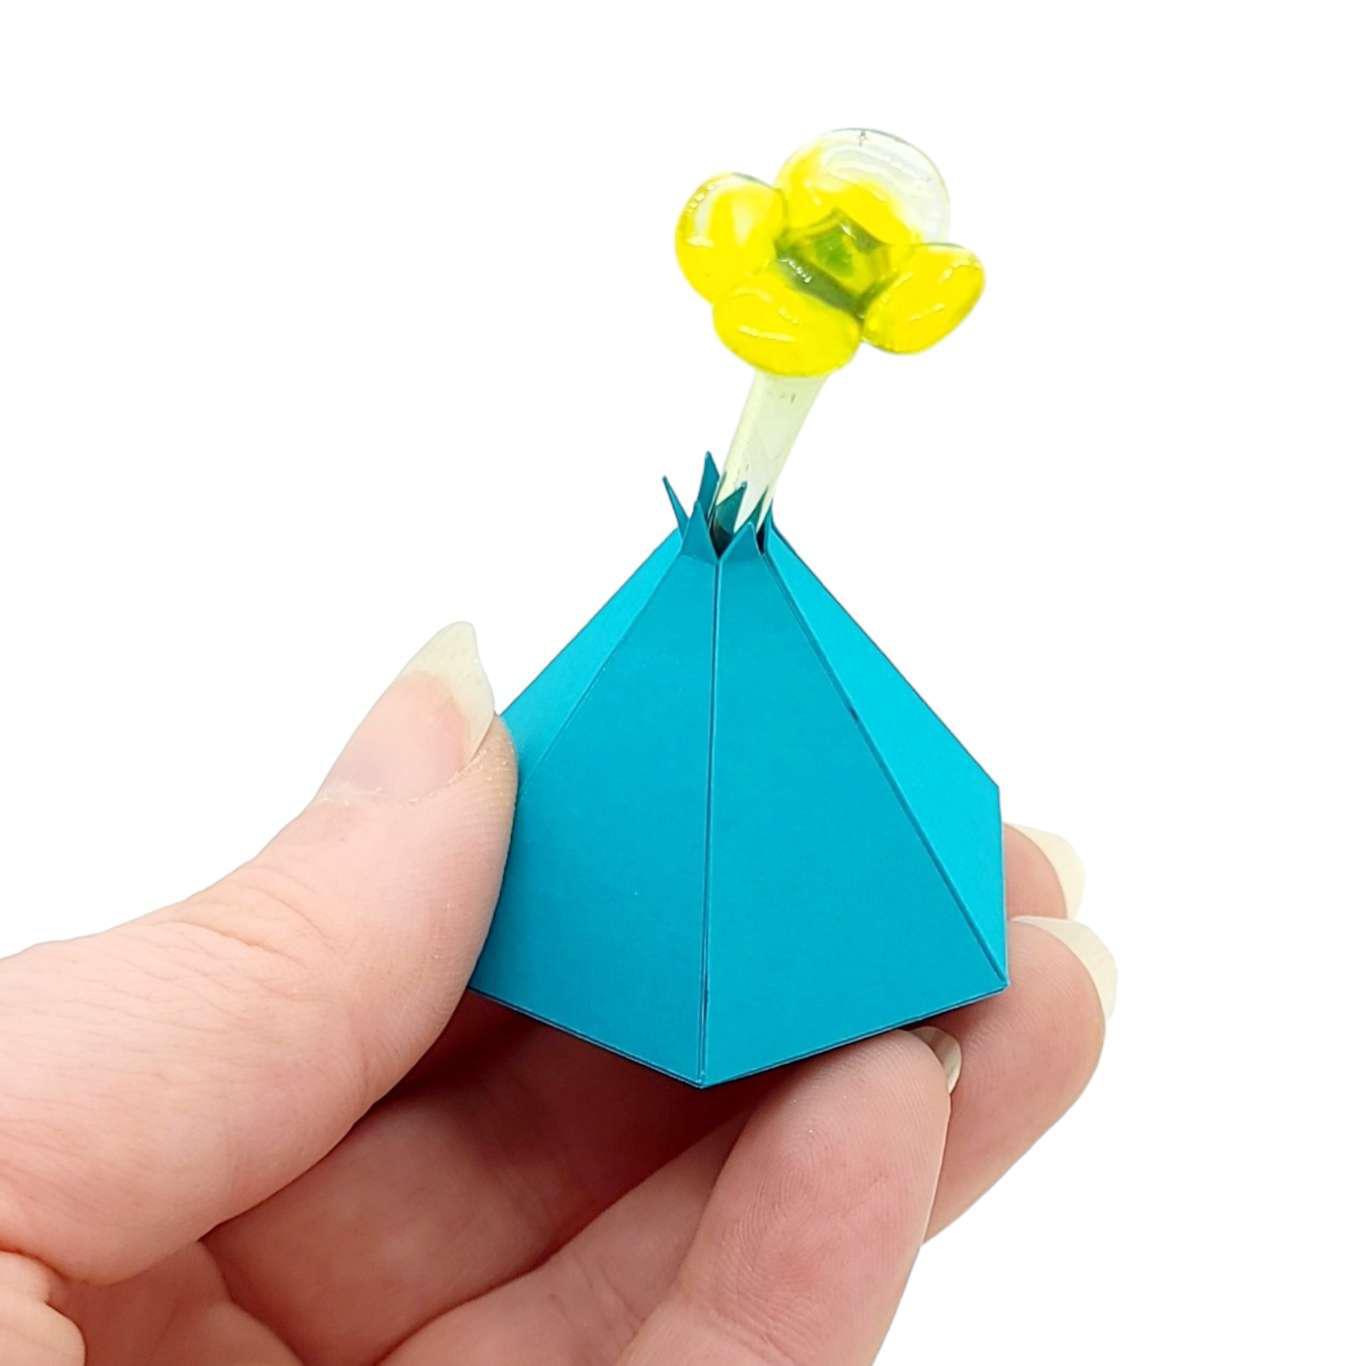 Trinket - Glass Flower with Hexagonal Base in Assorted Colors by Krista Bermeo Studio with Paper and Blade